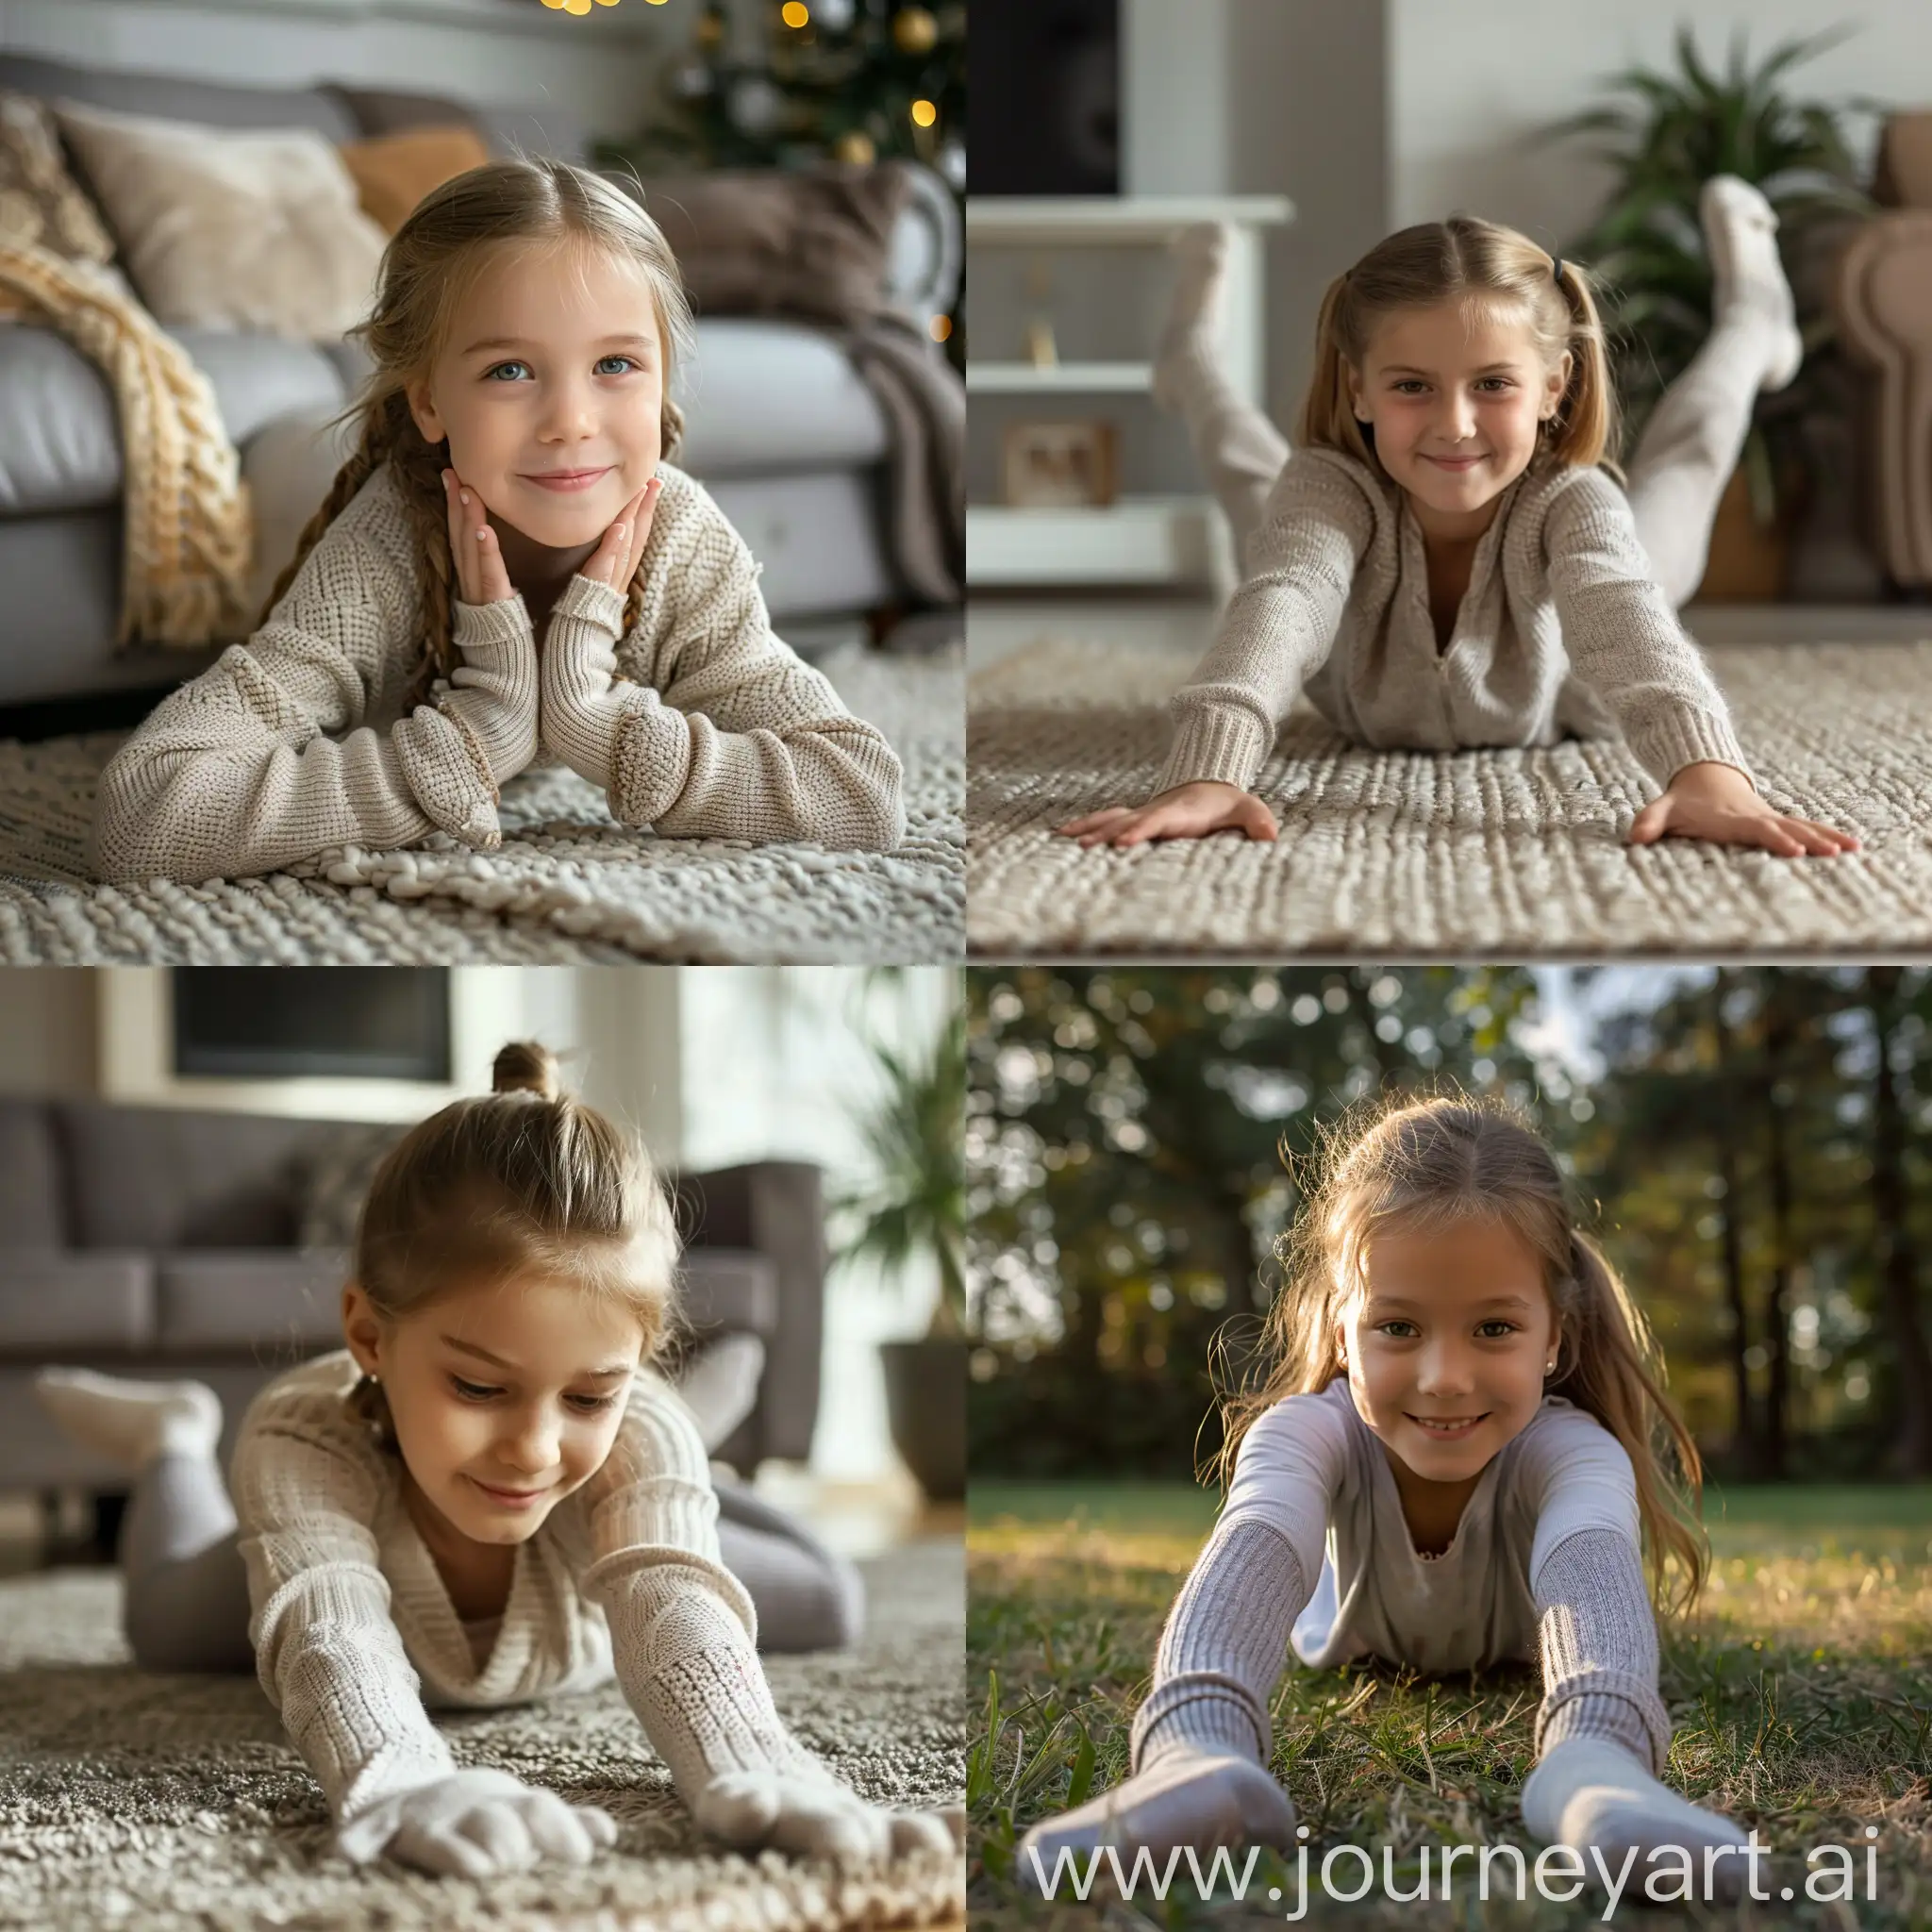 young girl stretching in socks